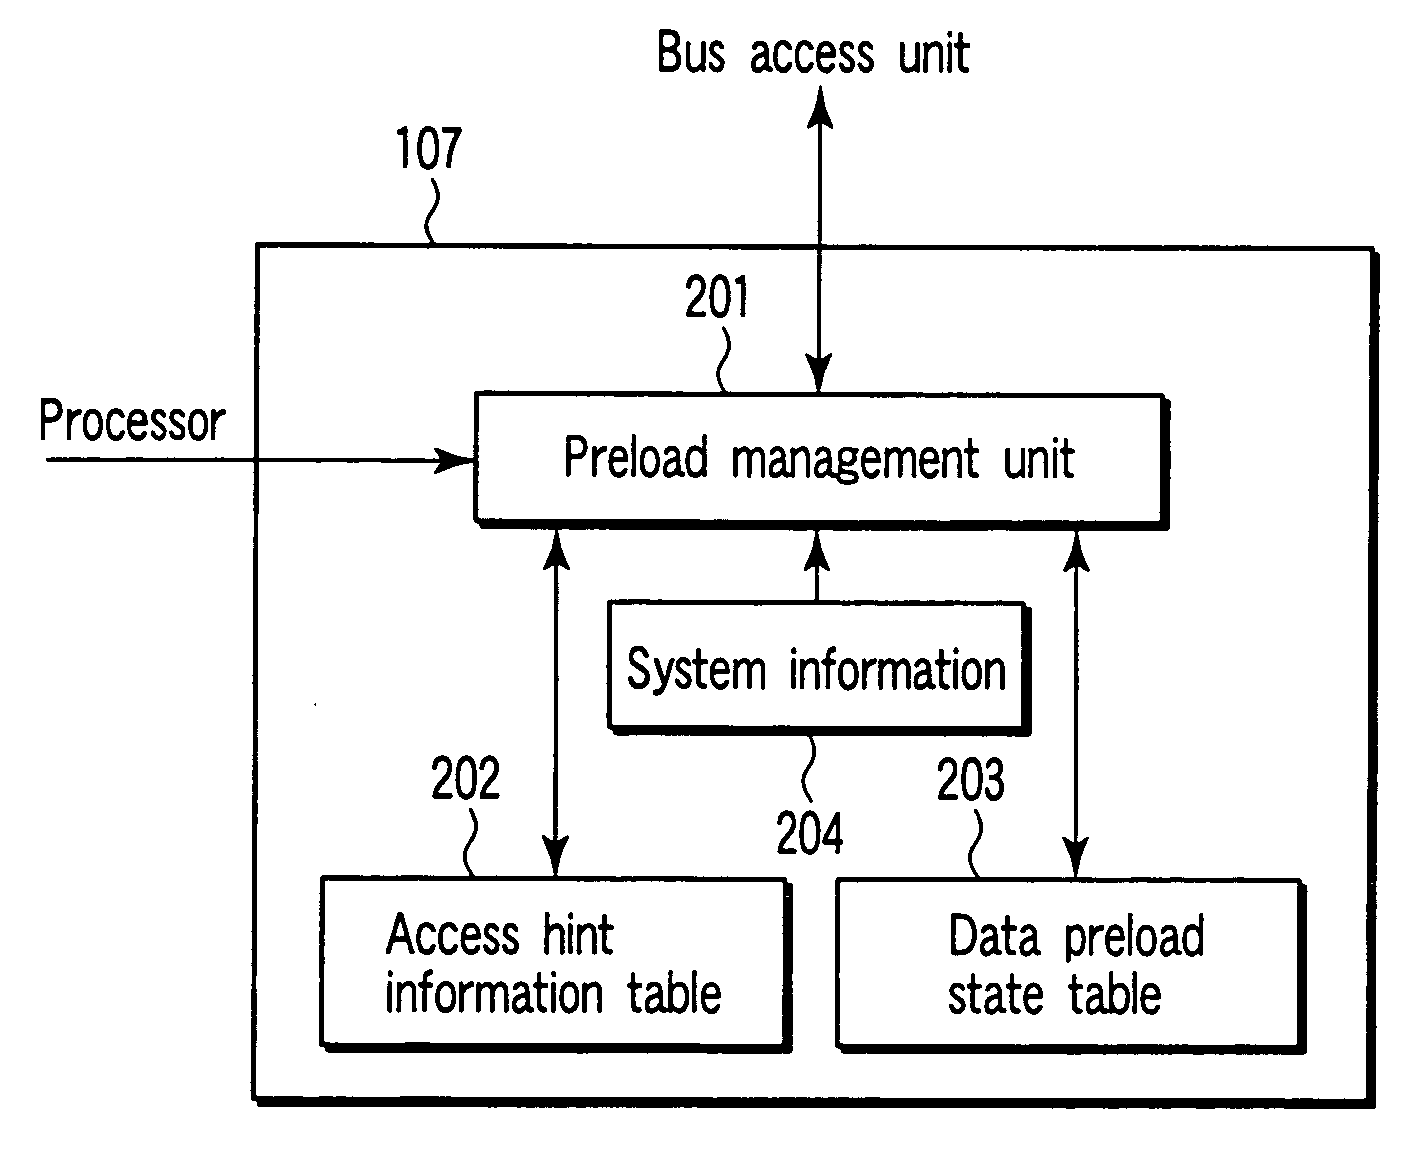 Preload controller, preload control method for controlling preload of data by processor to temporary memory, and program